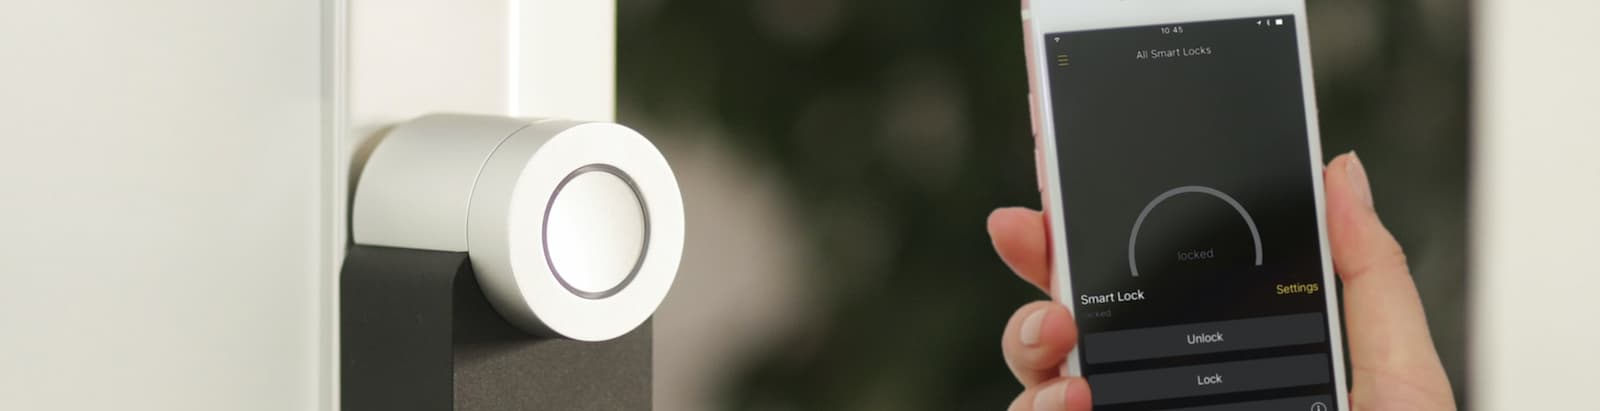 A smartphone next to a smart lock on a door